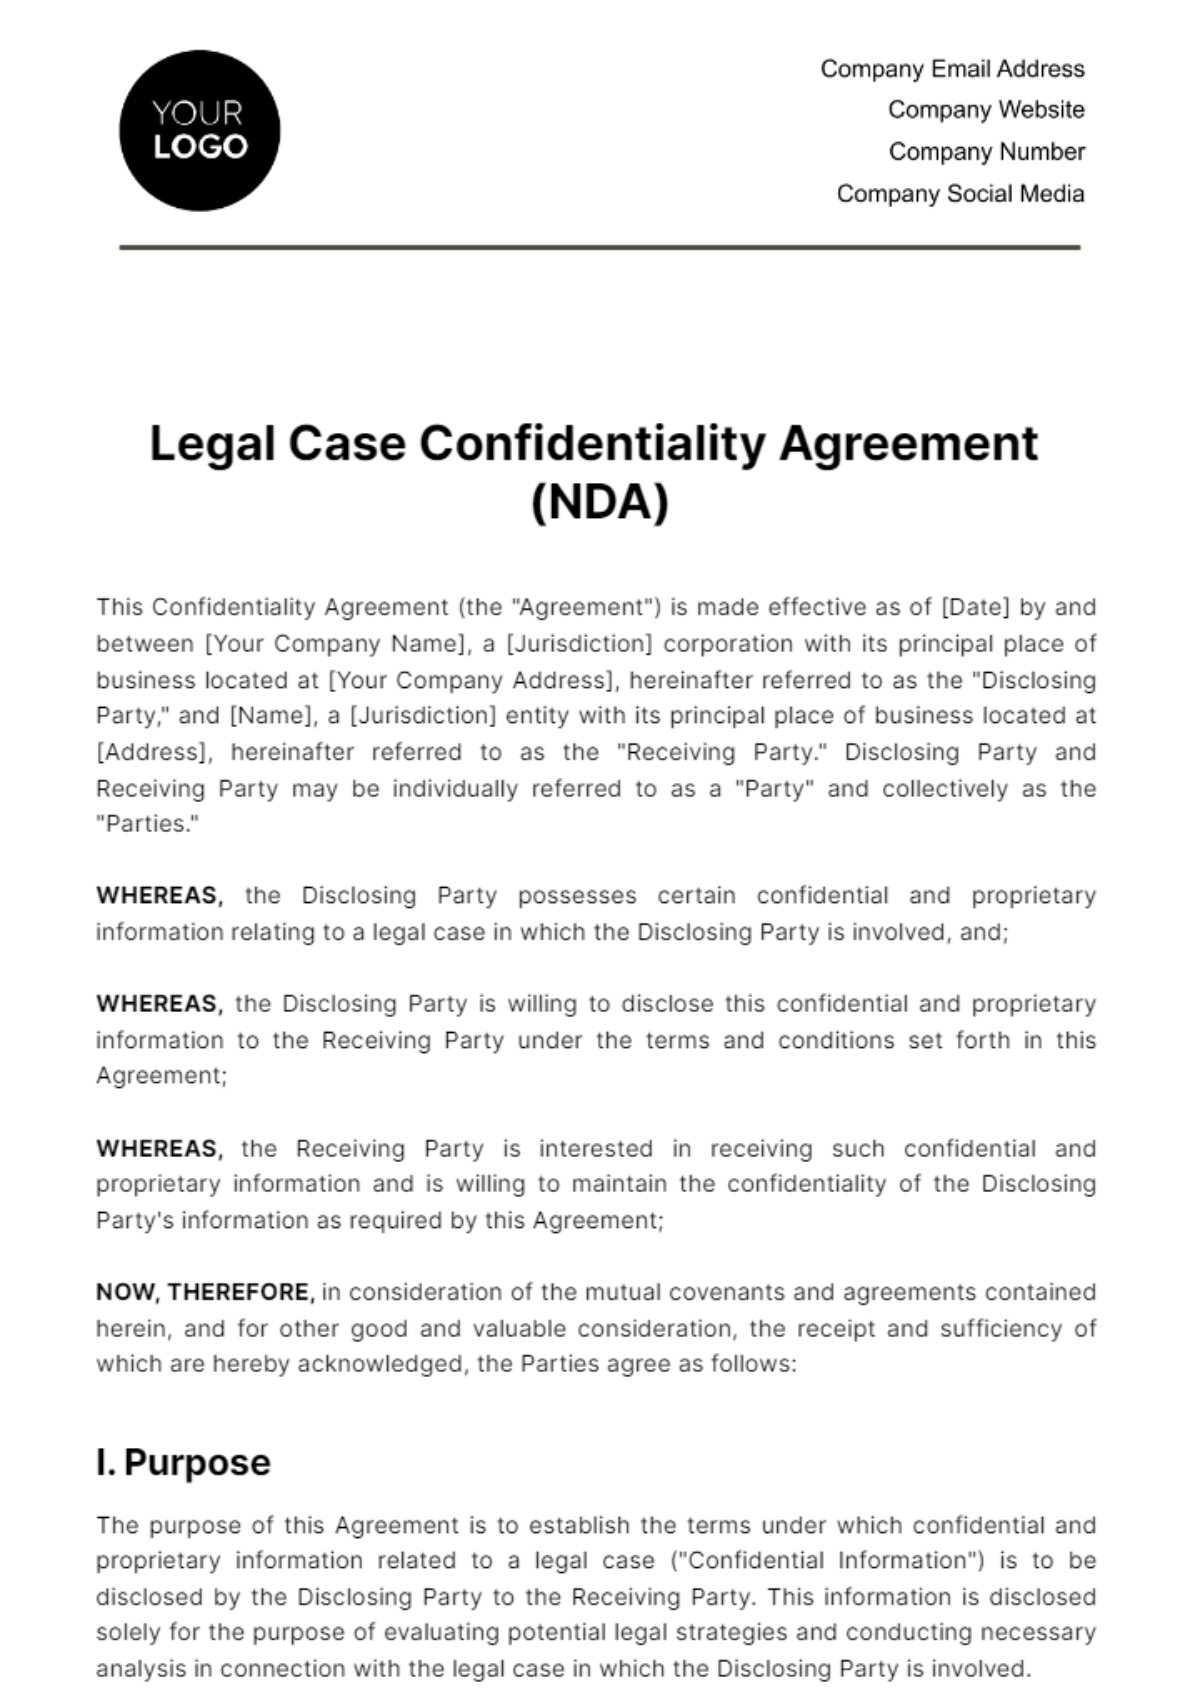 Legal Case Confidentiality Agreement (NDA) Template